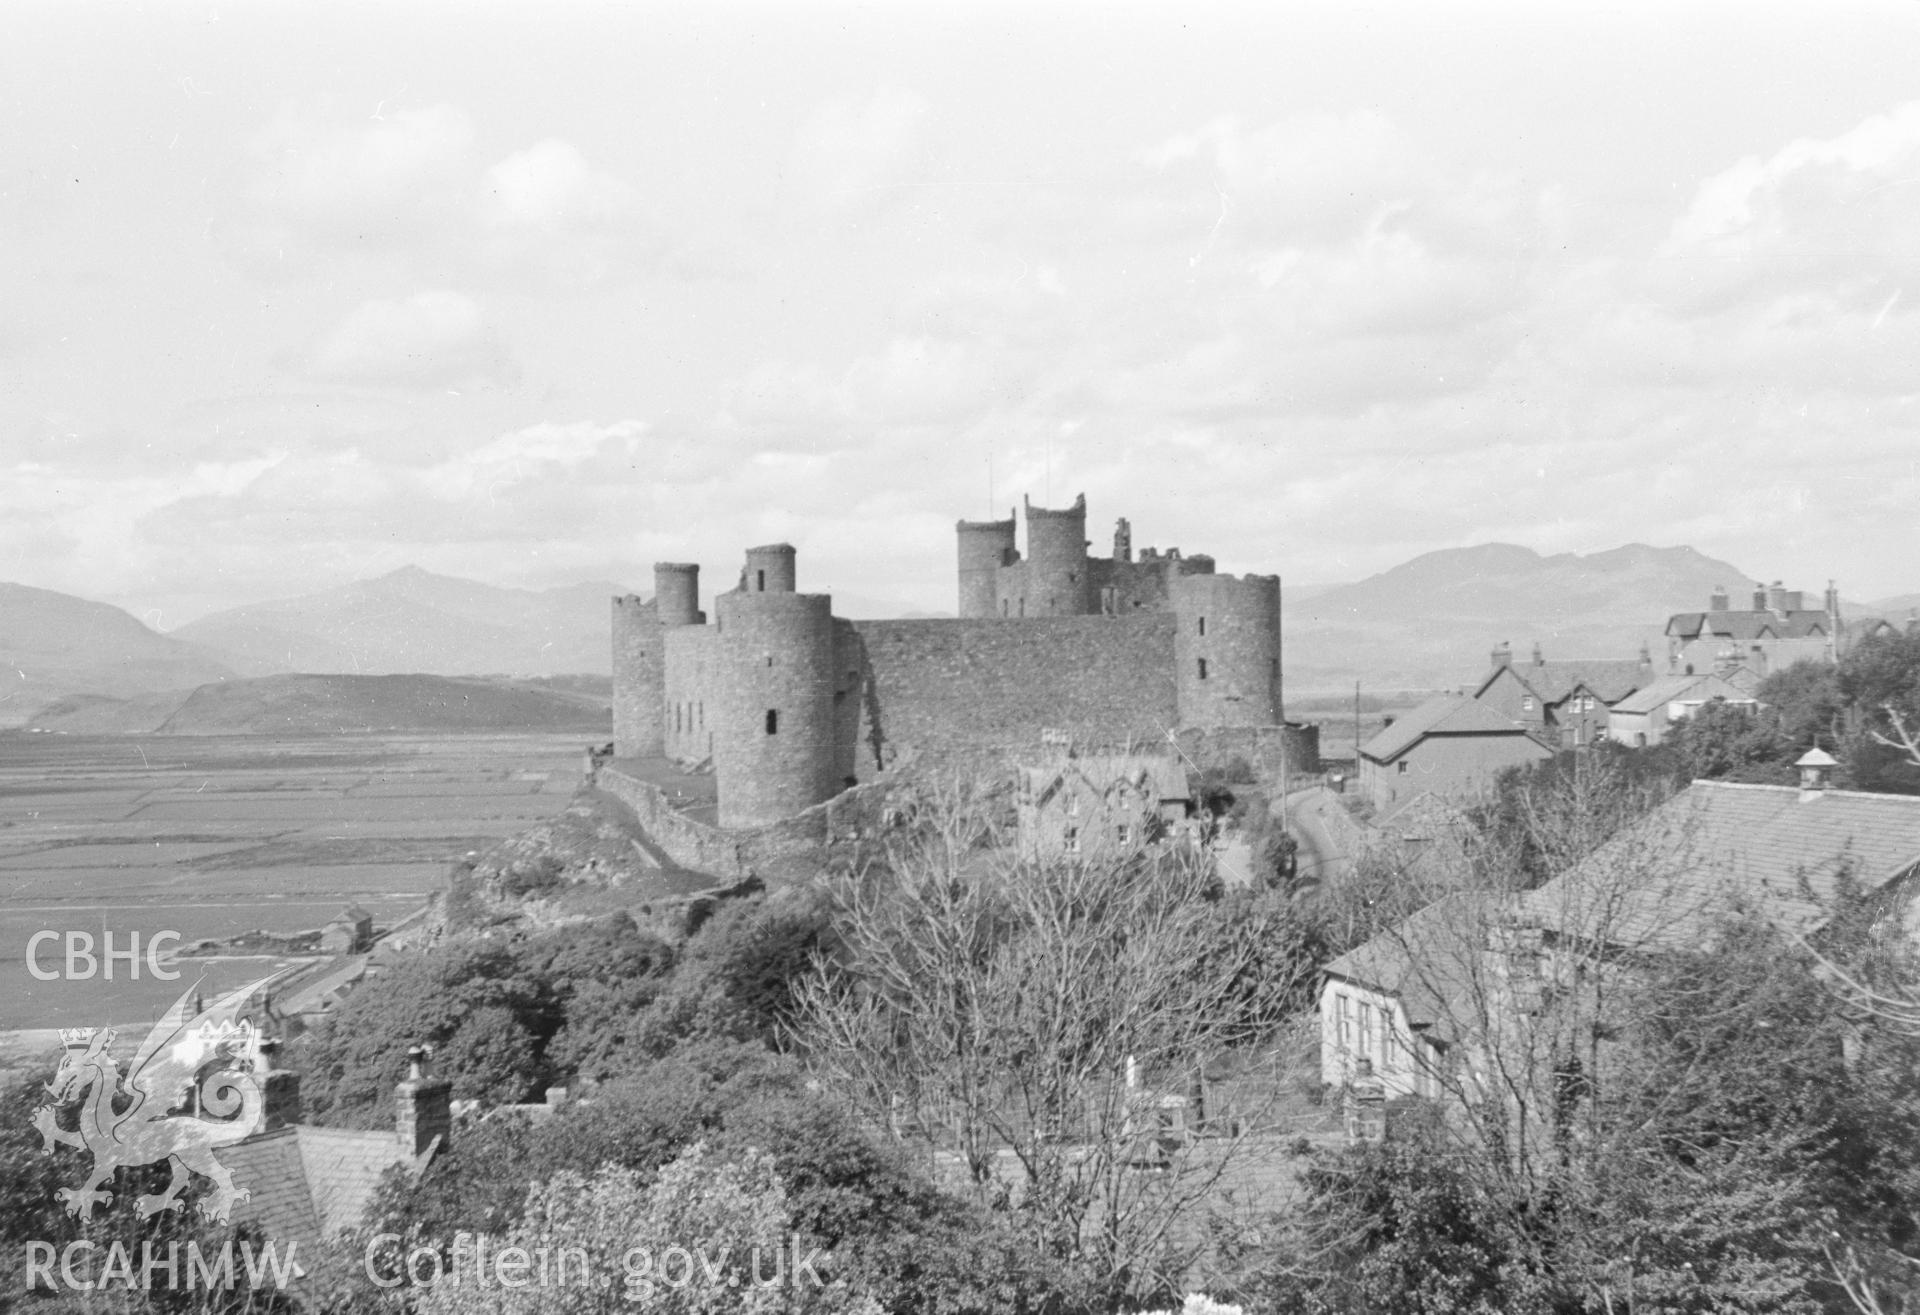 Digital copy of a black and white negative showing a general view of Harlech Castle from south.